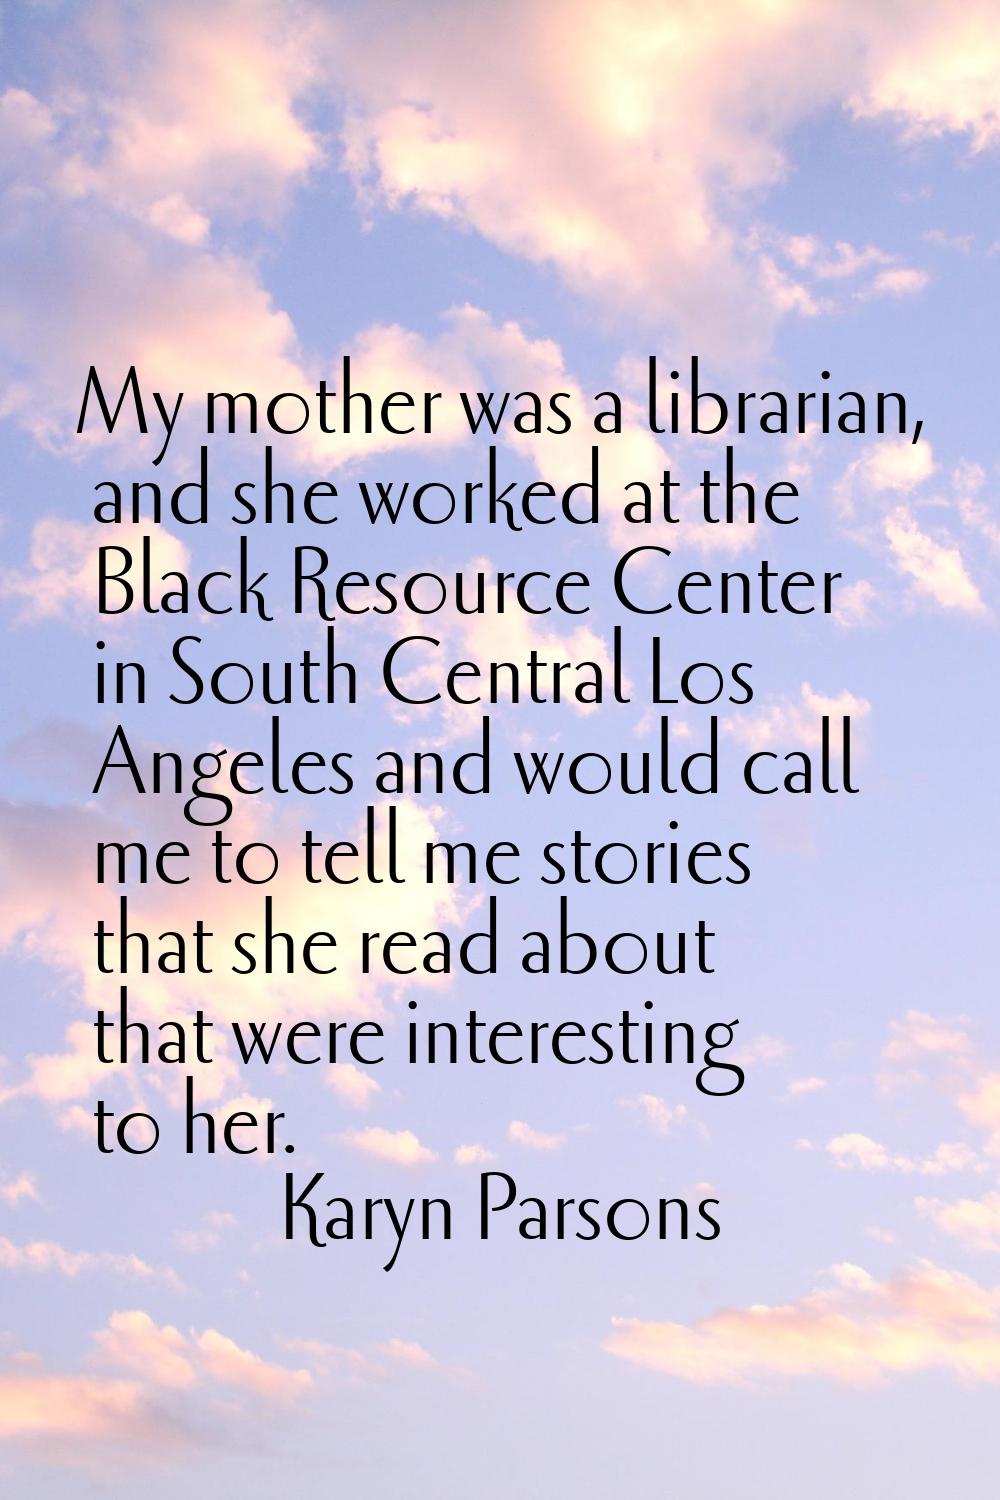 My mother was a librarian, and she worked at the Black Resource Center in South Central Los Angeles